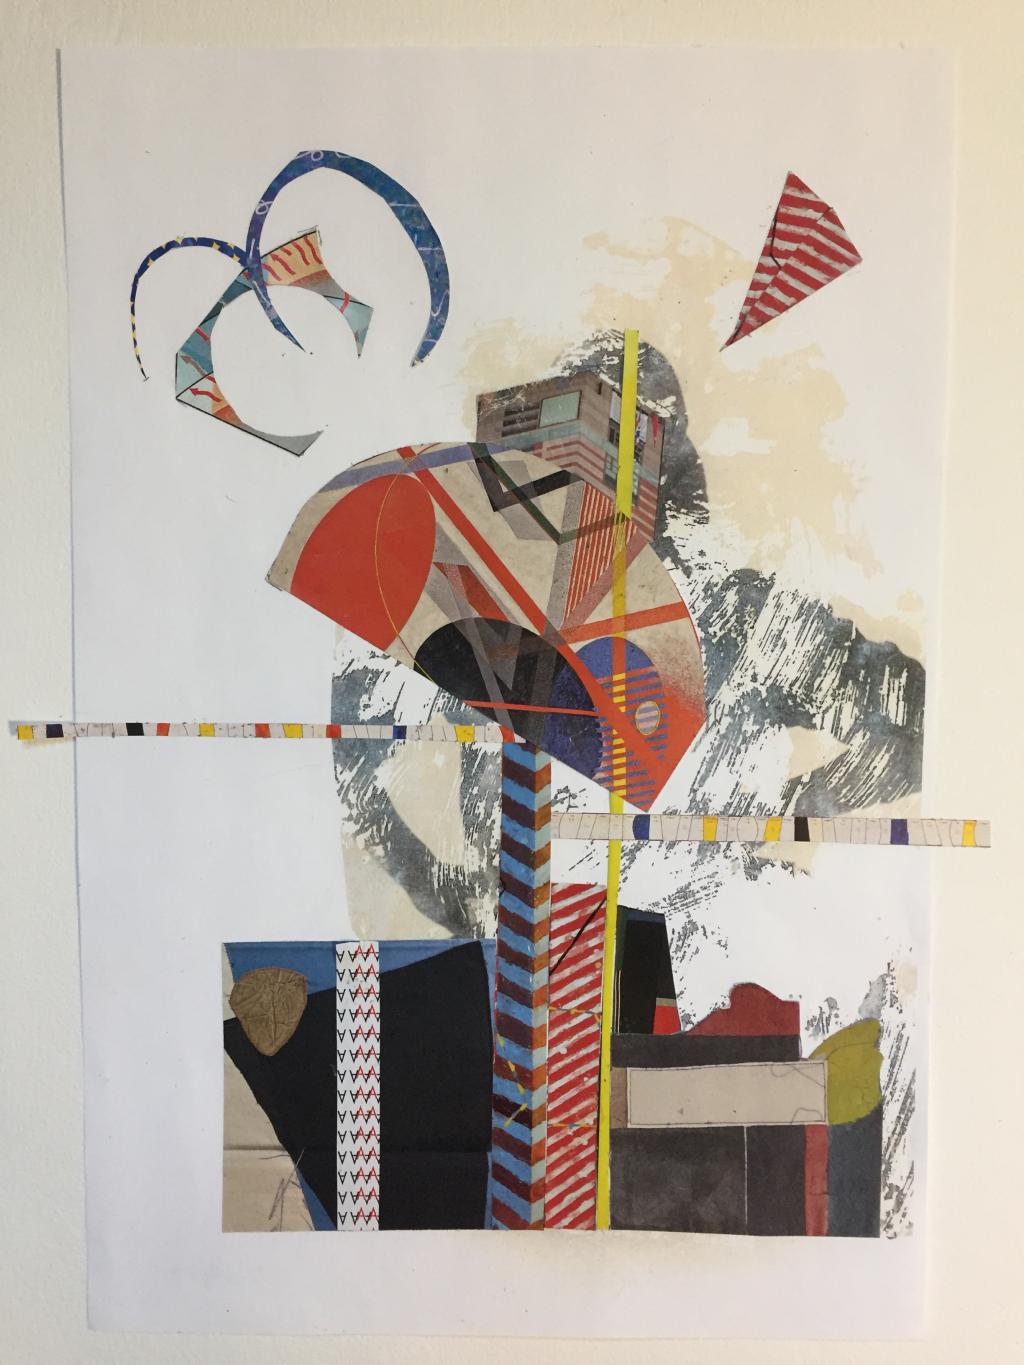 A collage by Judy Gould titled "Balancing Act"